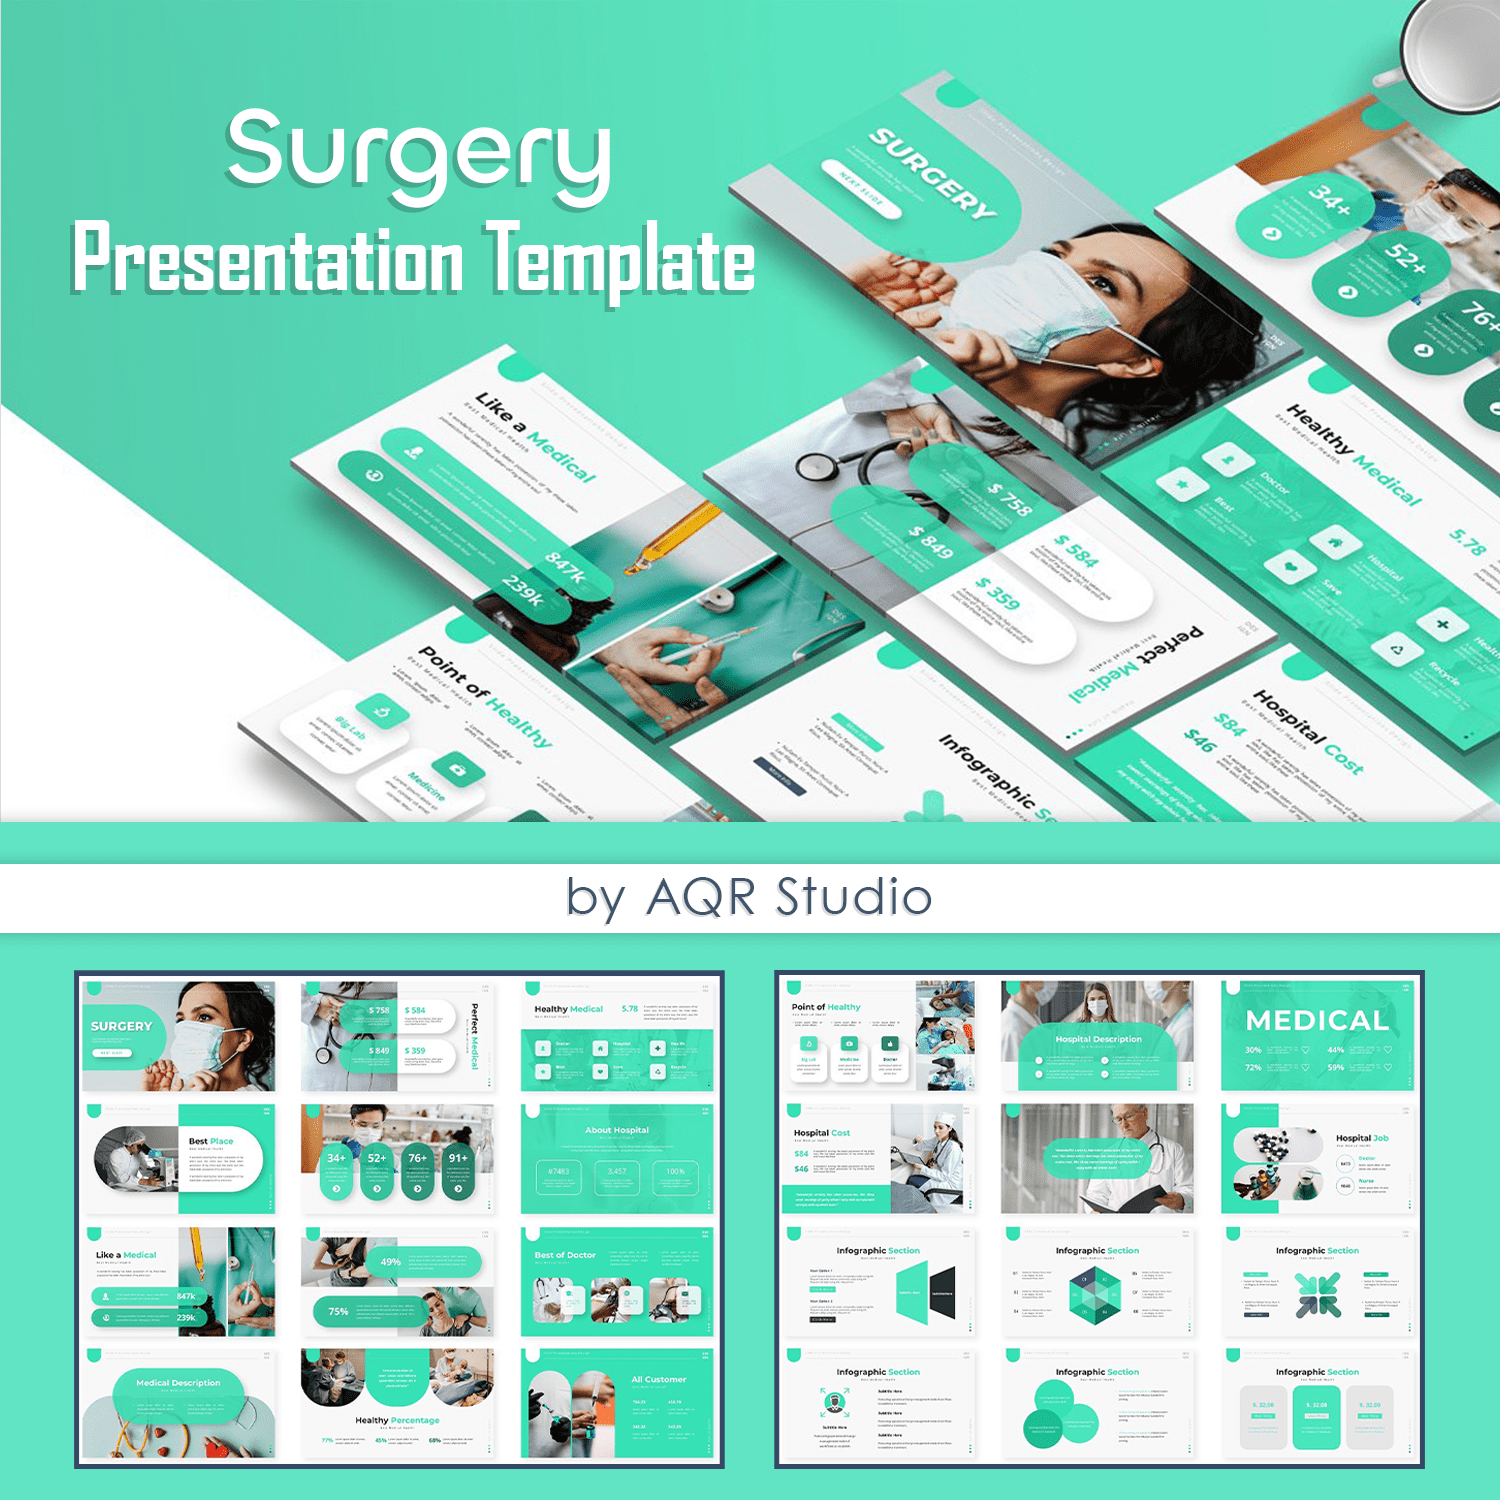 Surgery - Presentation Template cover.